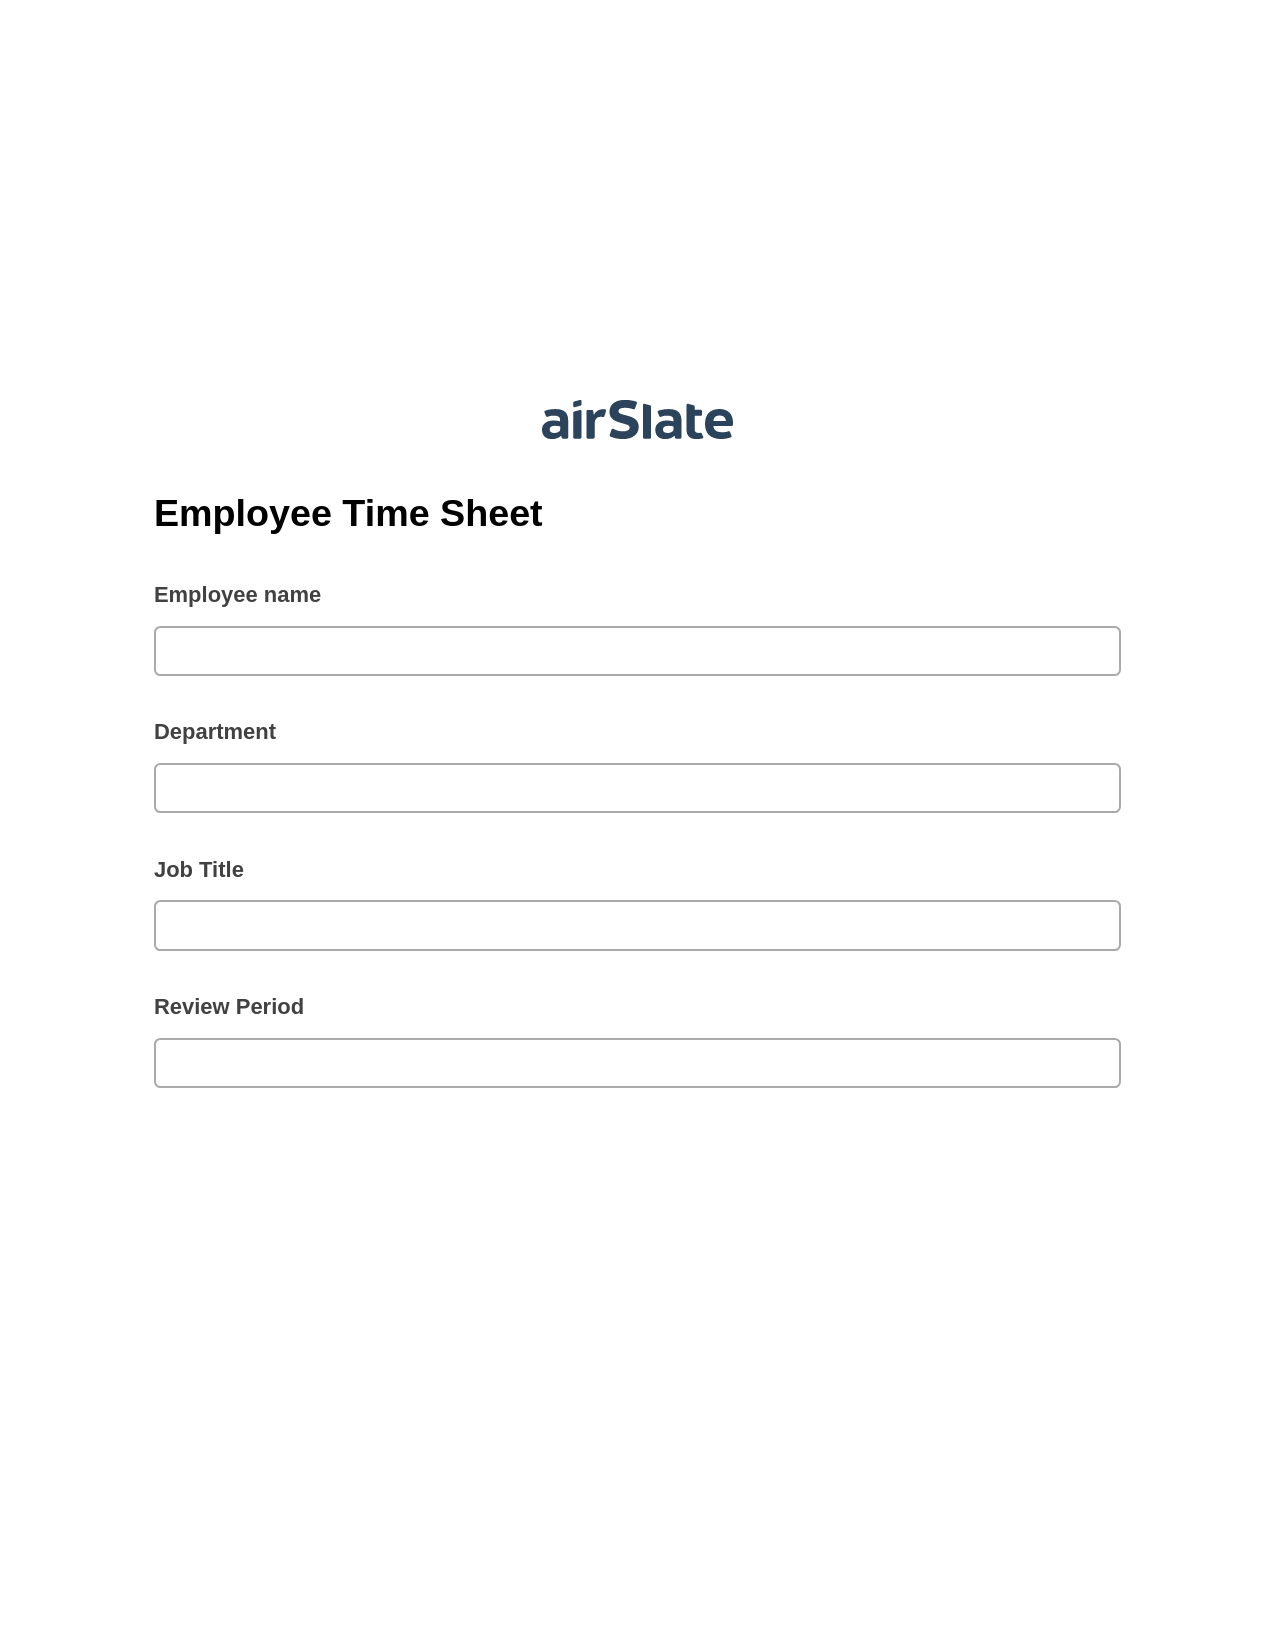 Employee Time Sheet Pre-fill from another Slate Bot, Create Salesforce Records Bot, Slack Two-Way Binding Bot